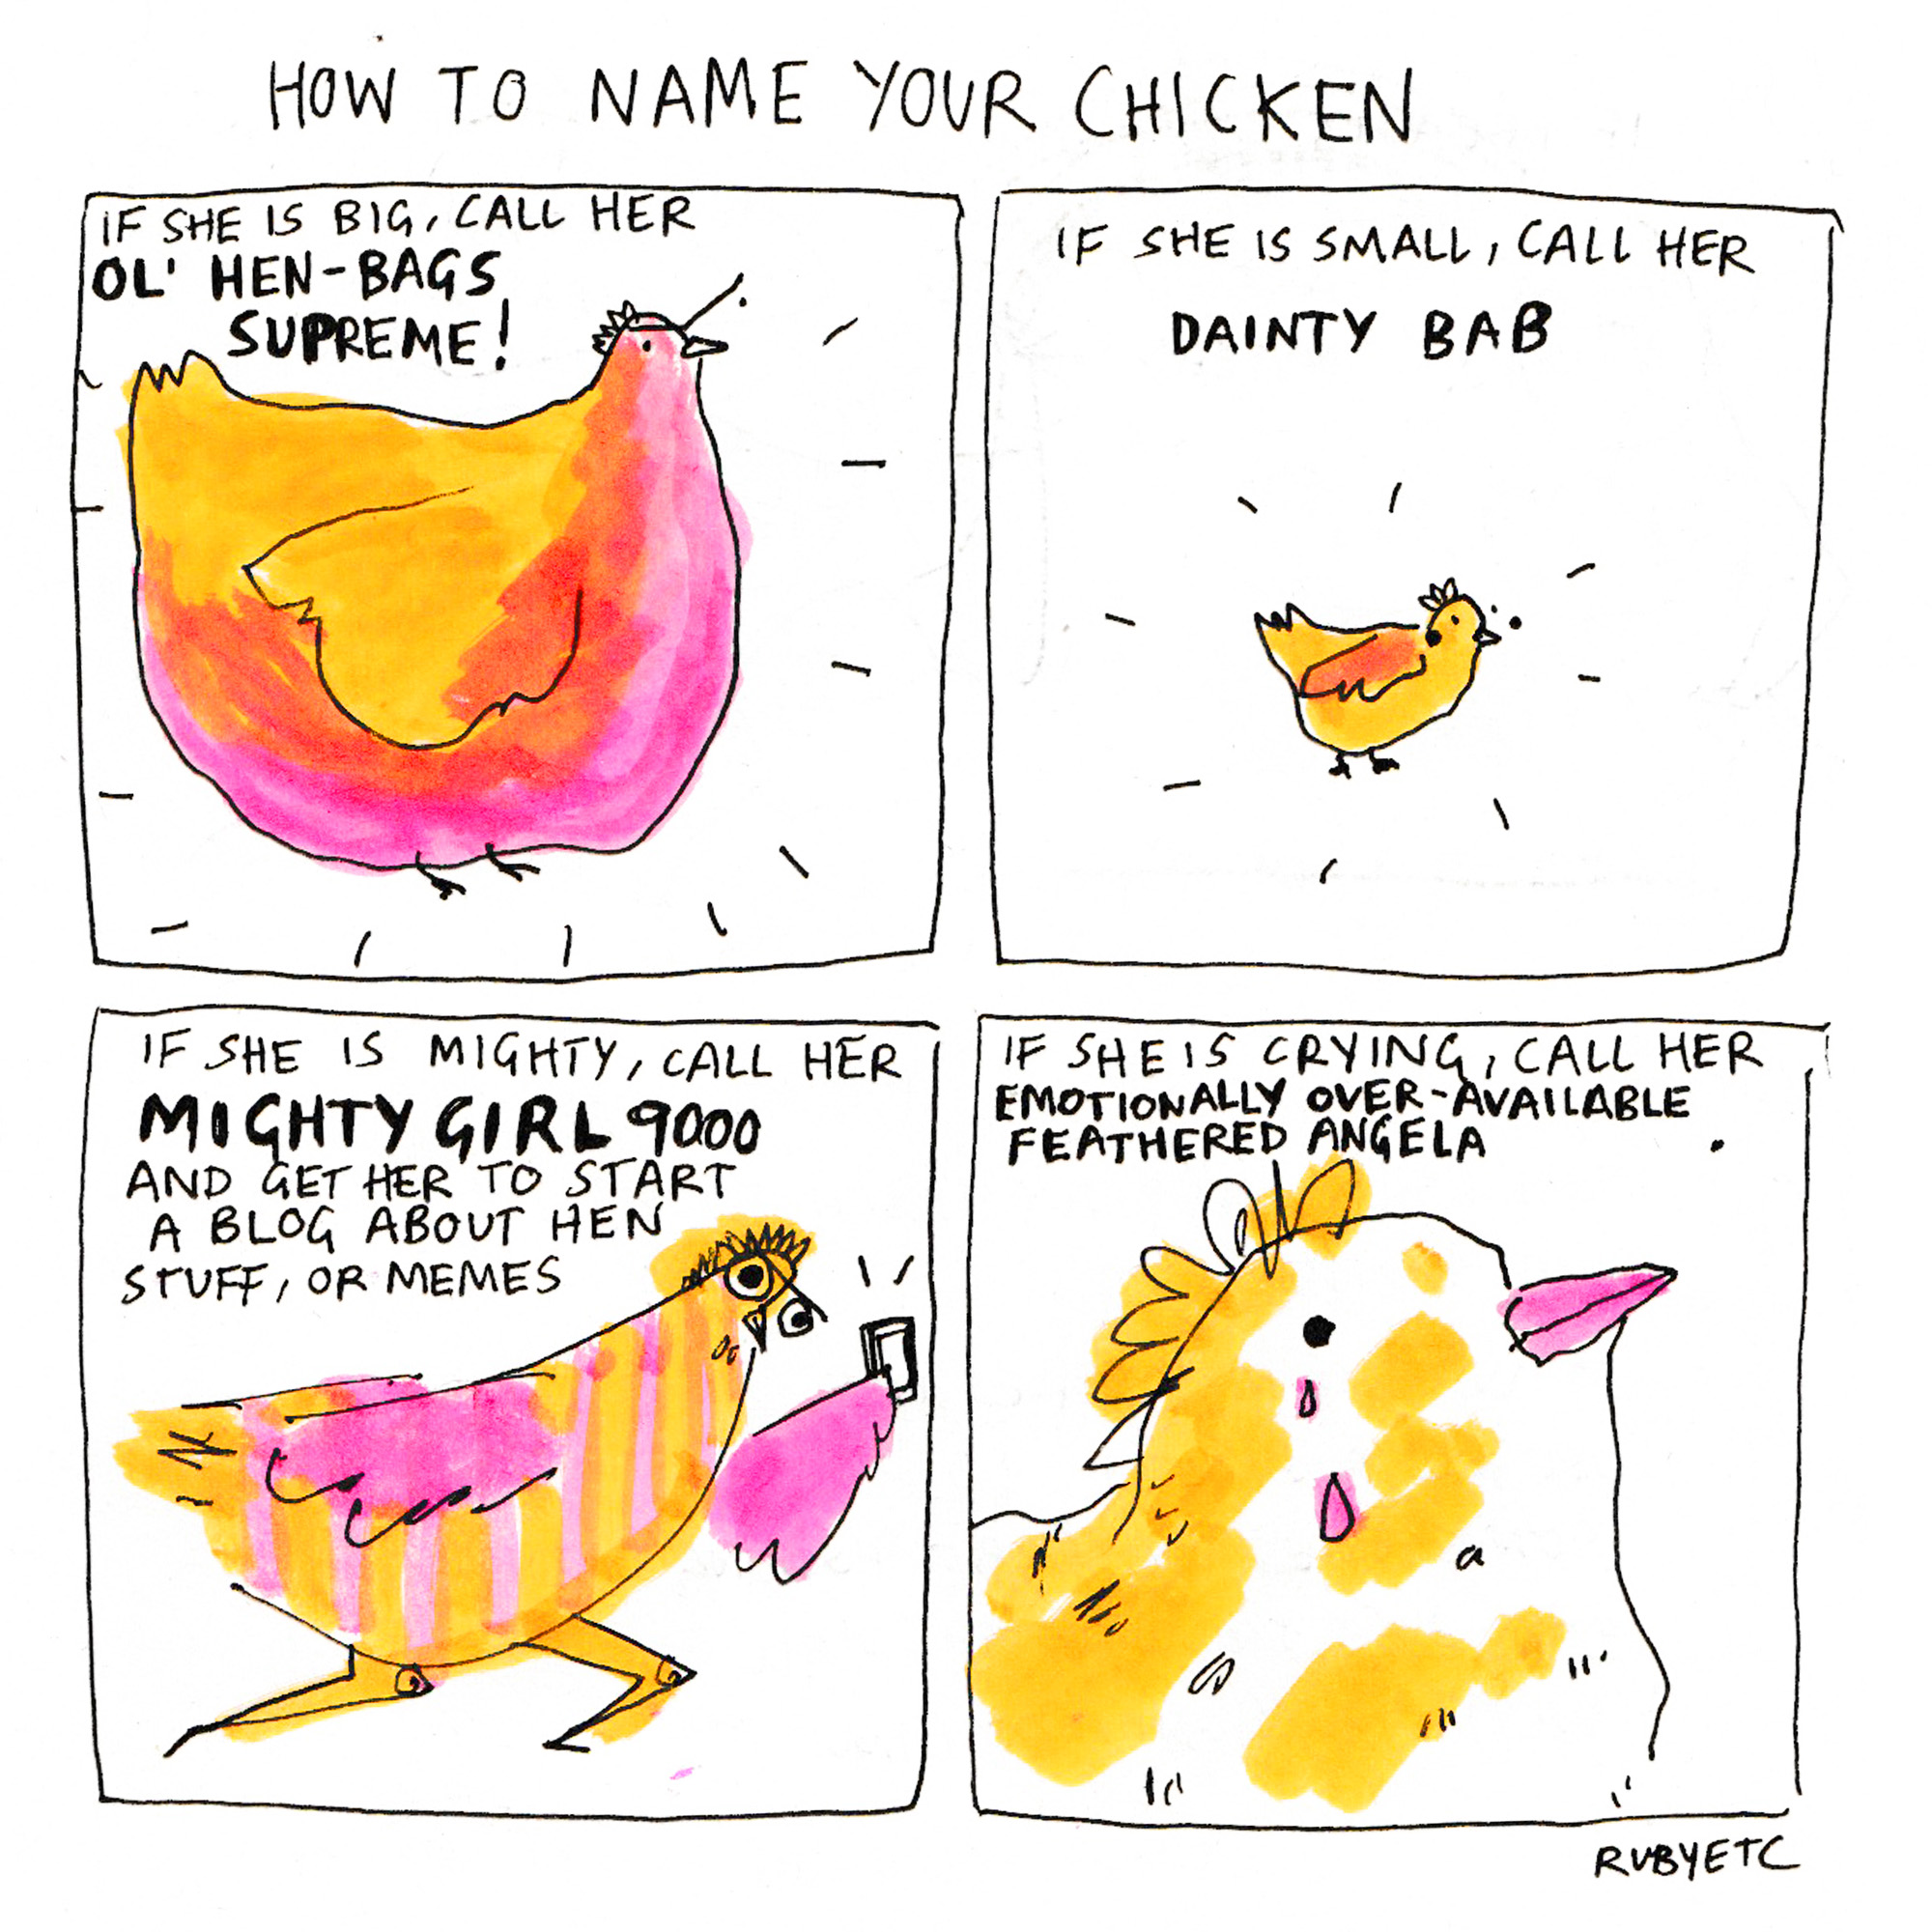 how to name chicken.jpg